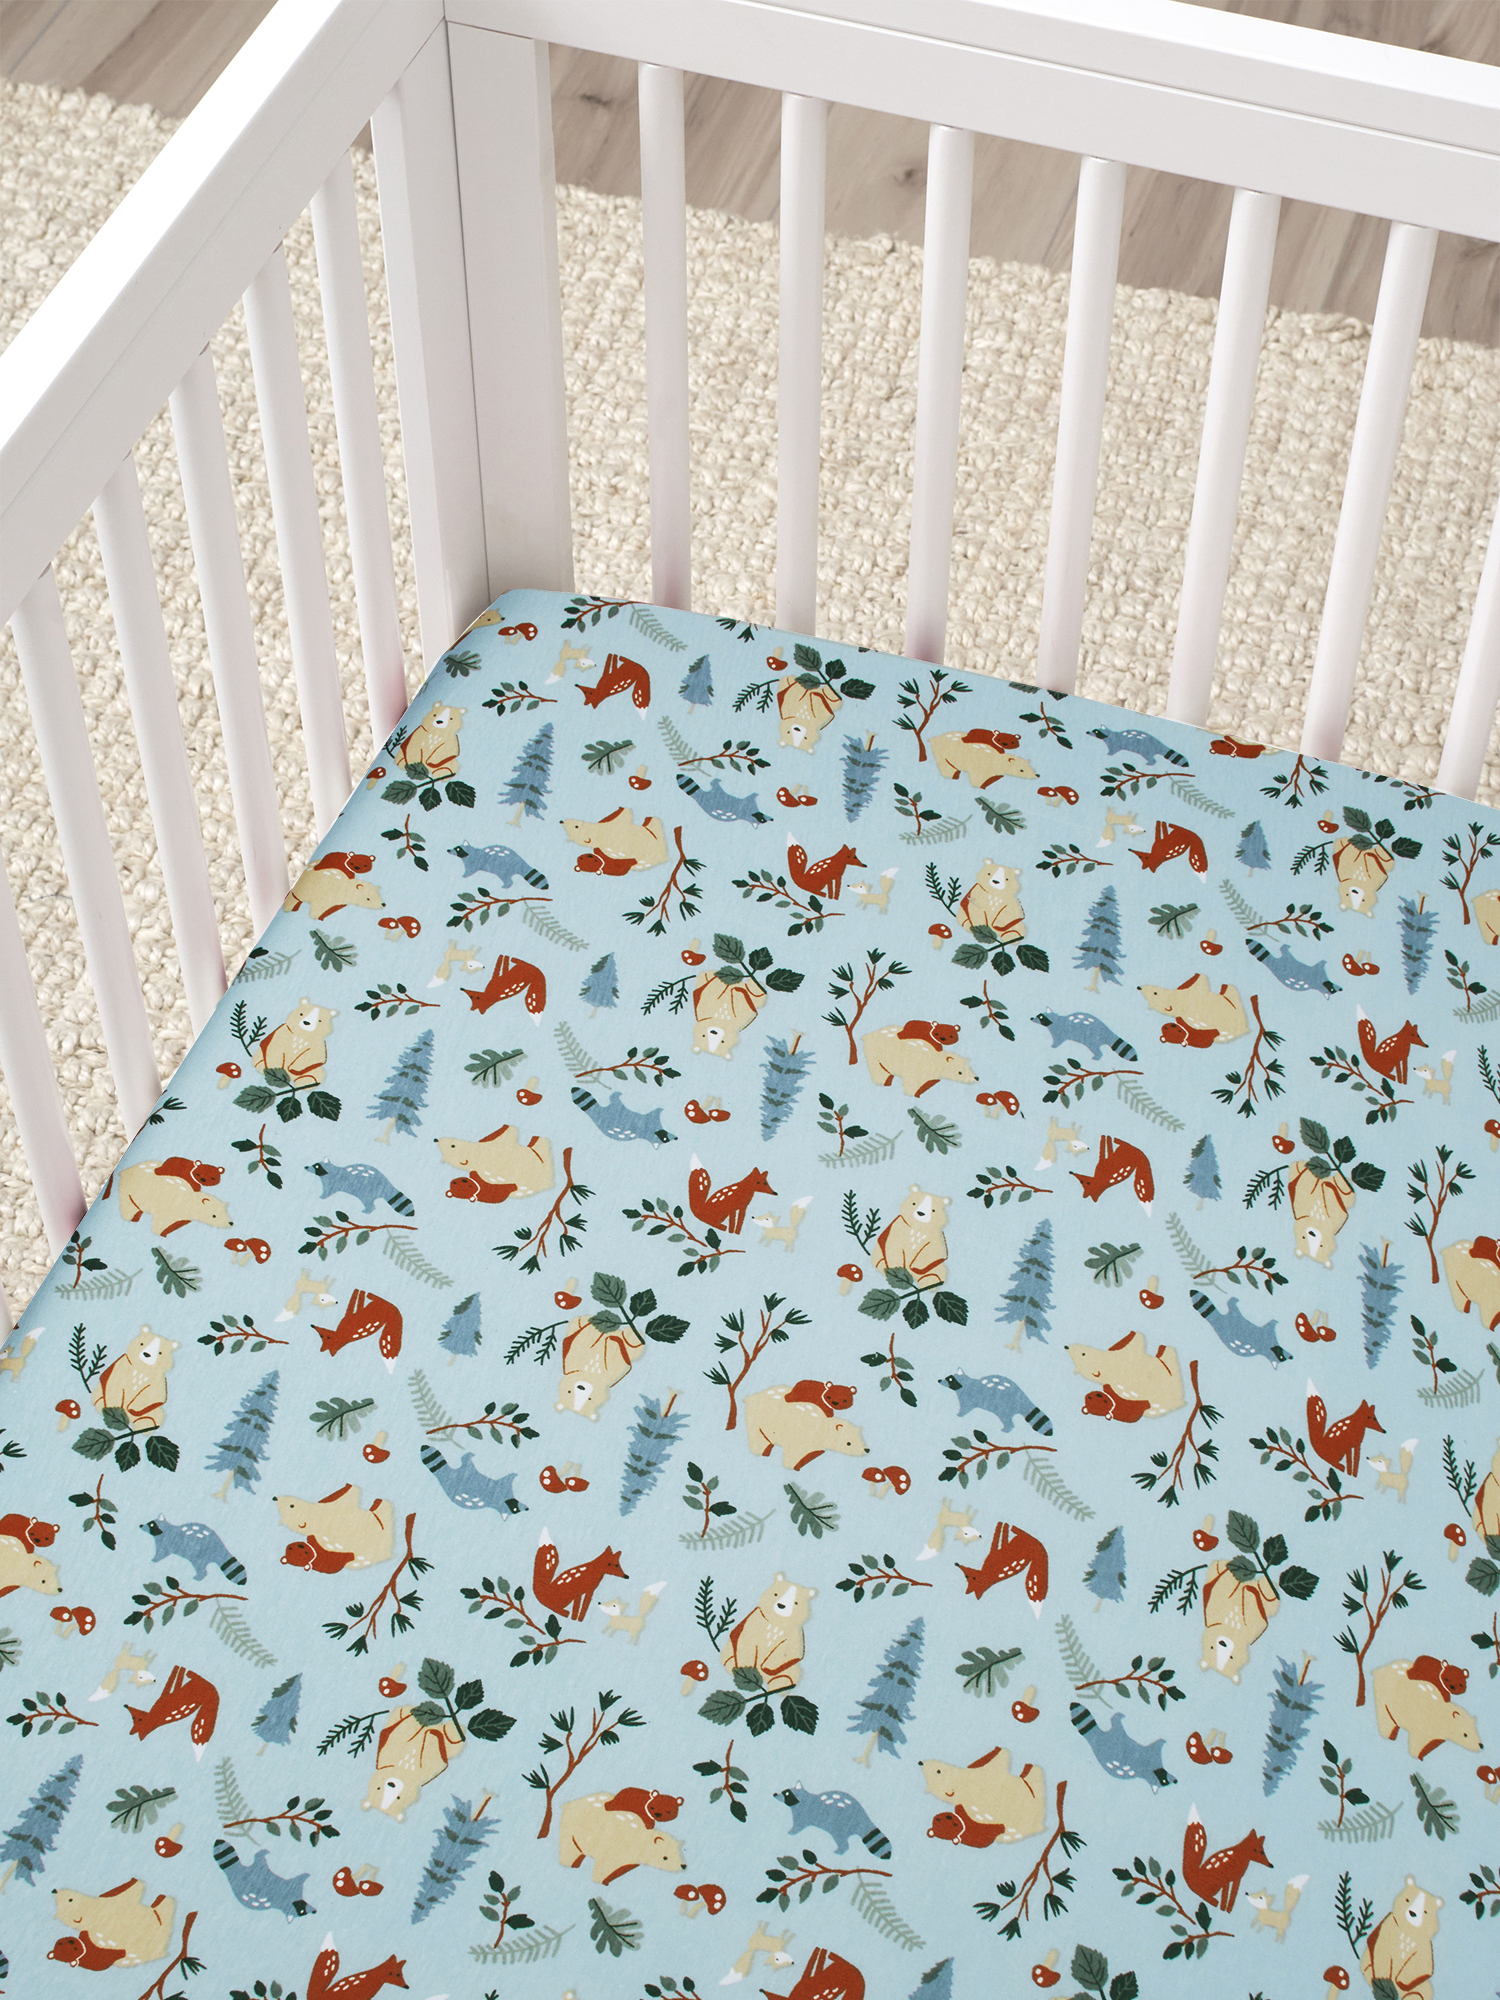 Modern Moments By Gerber Baby & Toddler Boy Ultra Soft Fitted Crib Sheet, Blue Woodland - image 3 of 7